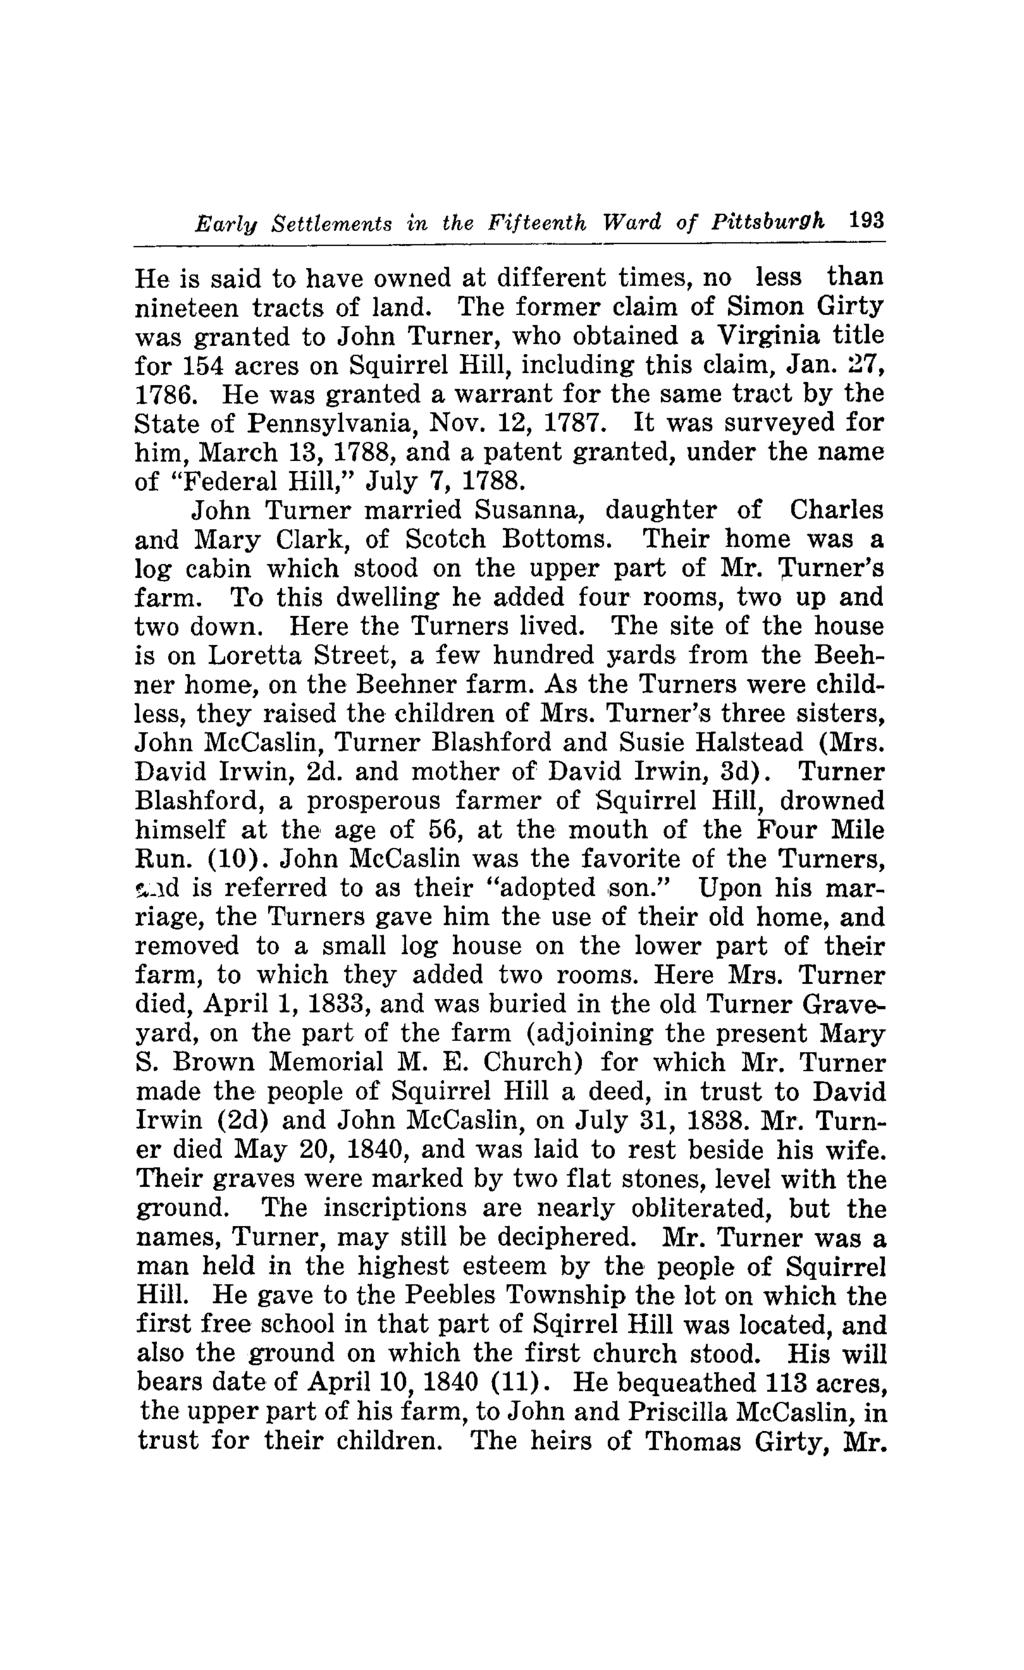 Early Settlements in the Fifteenth Ward of Pittsburgh 193 He is said to have owned at different times, no less than nineteen tracts of land.